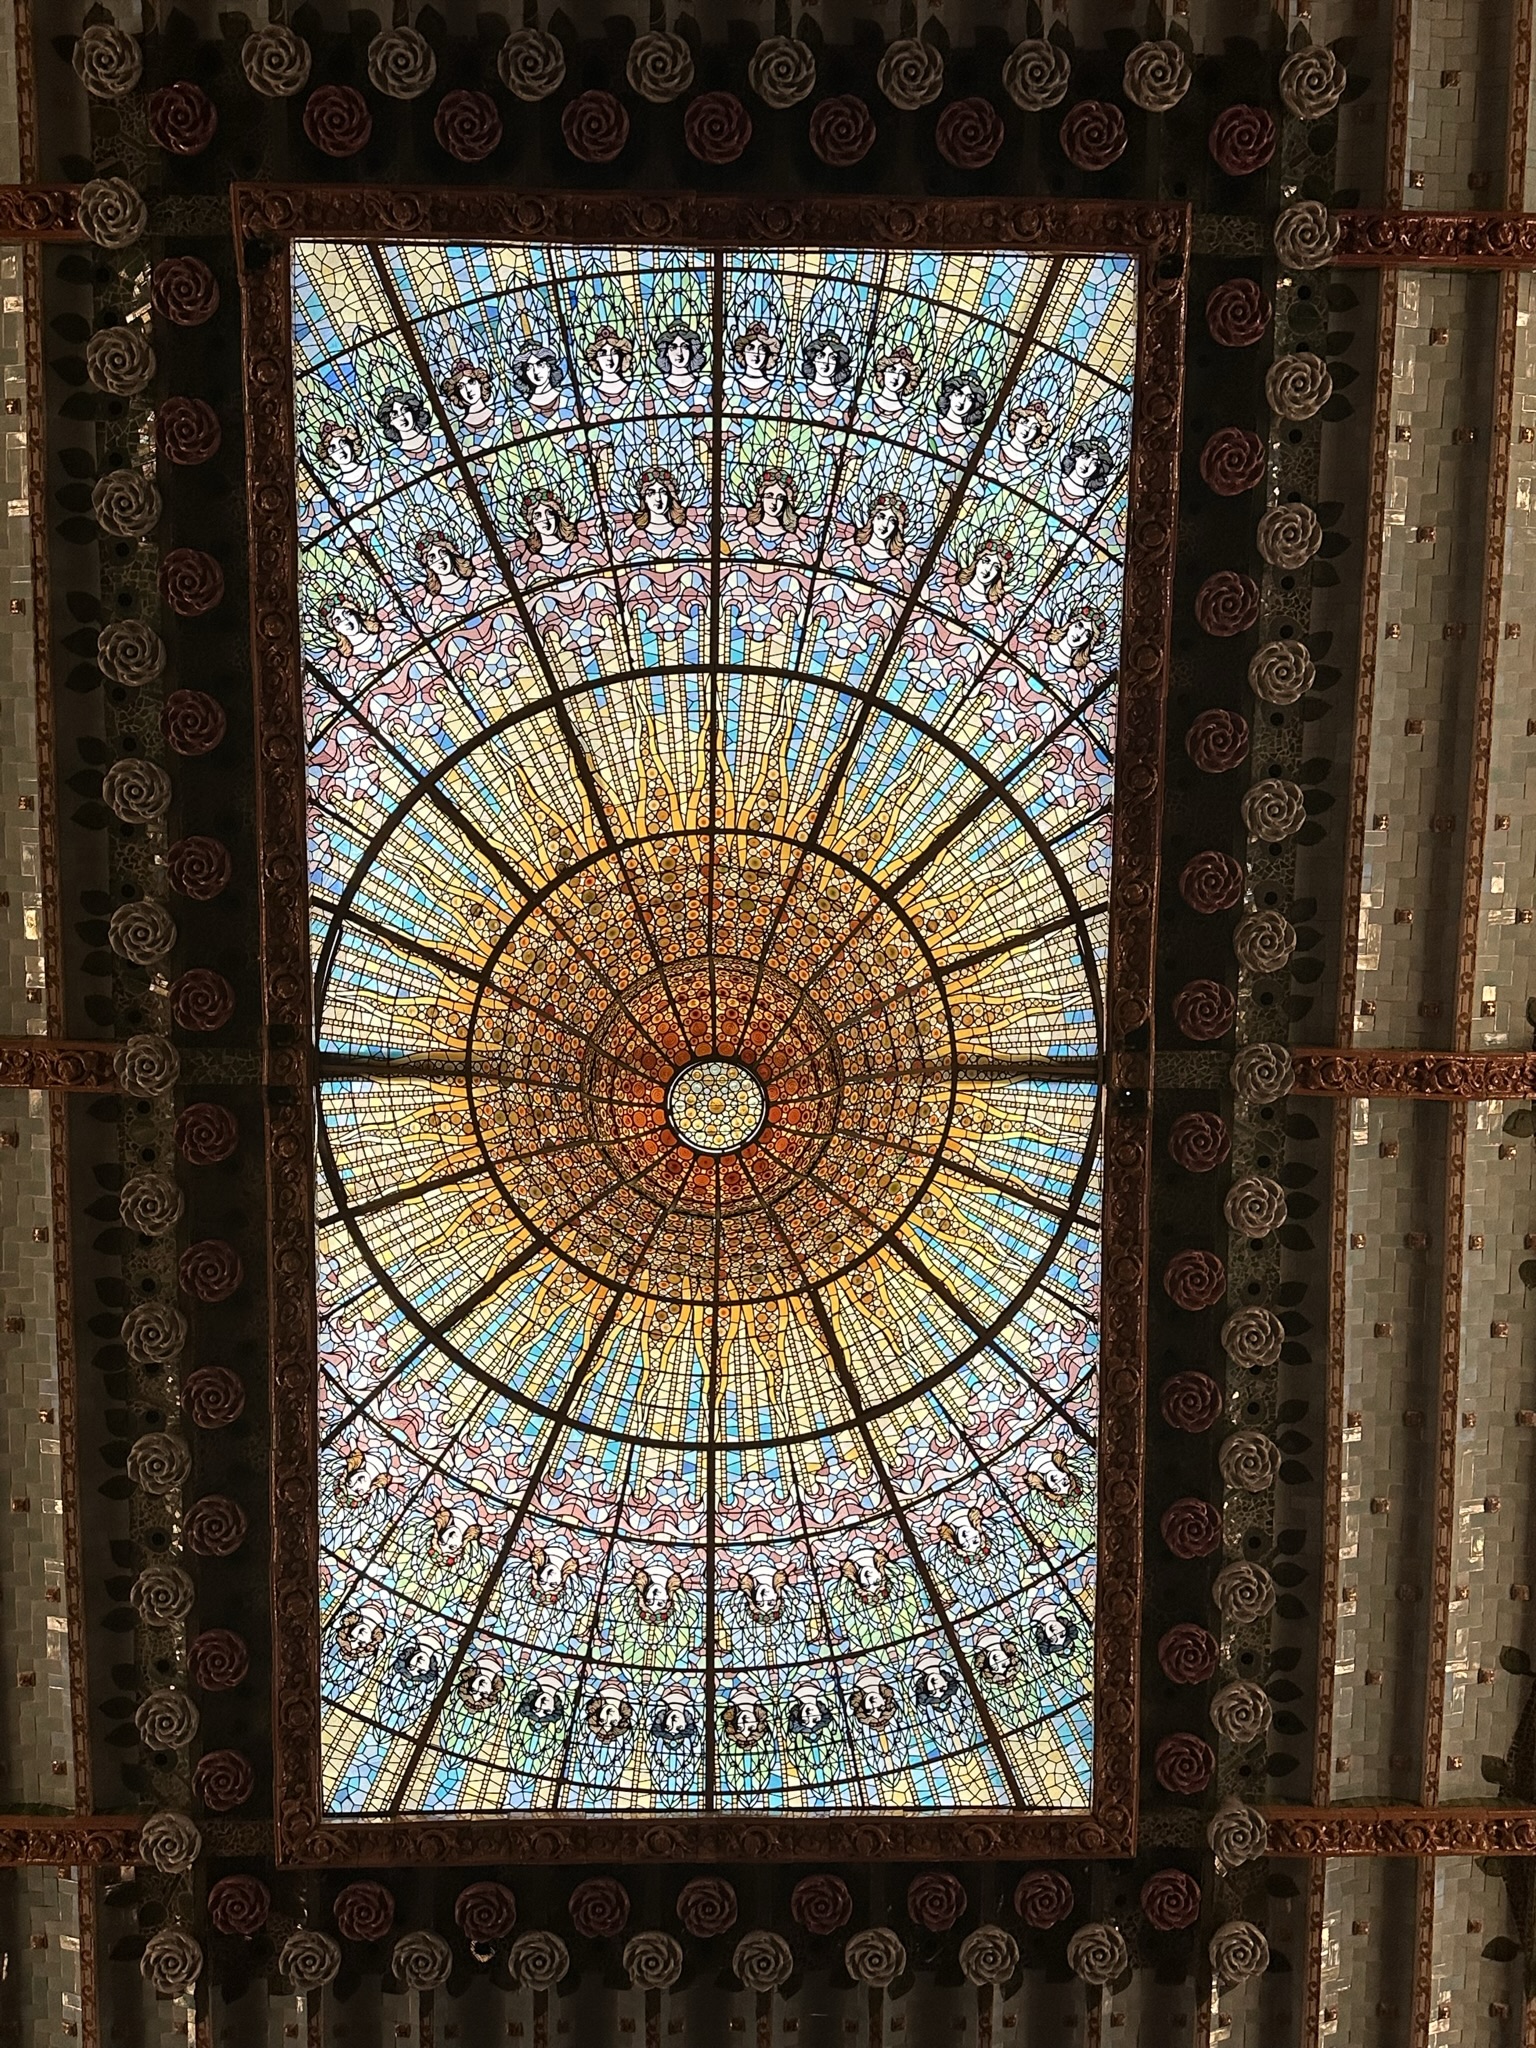 Central stained-glass skylight known as the Sun fills the theatre with natural light